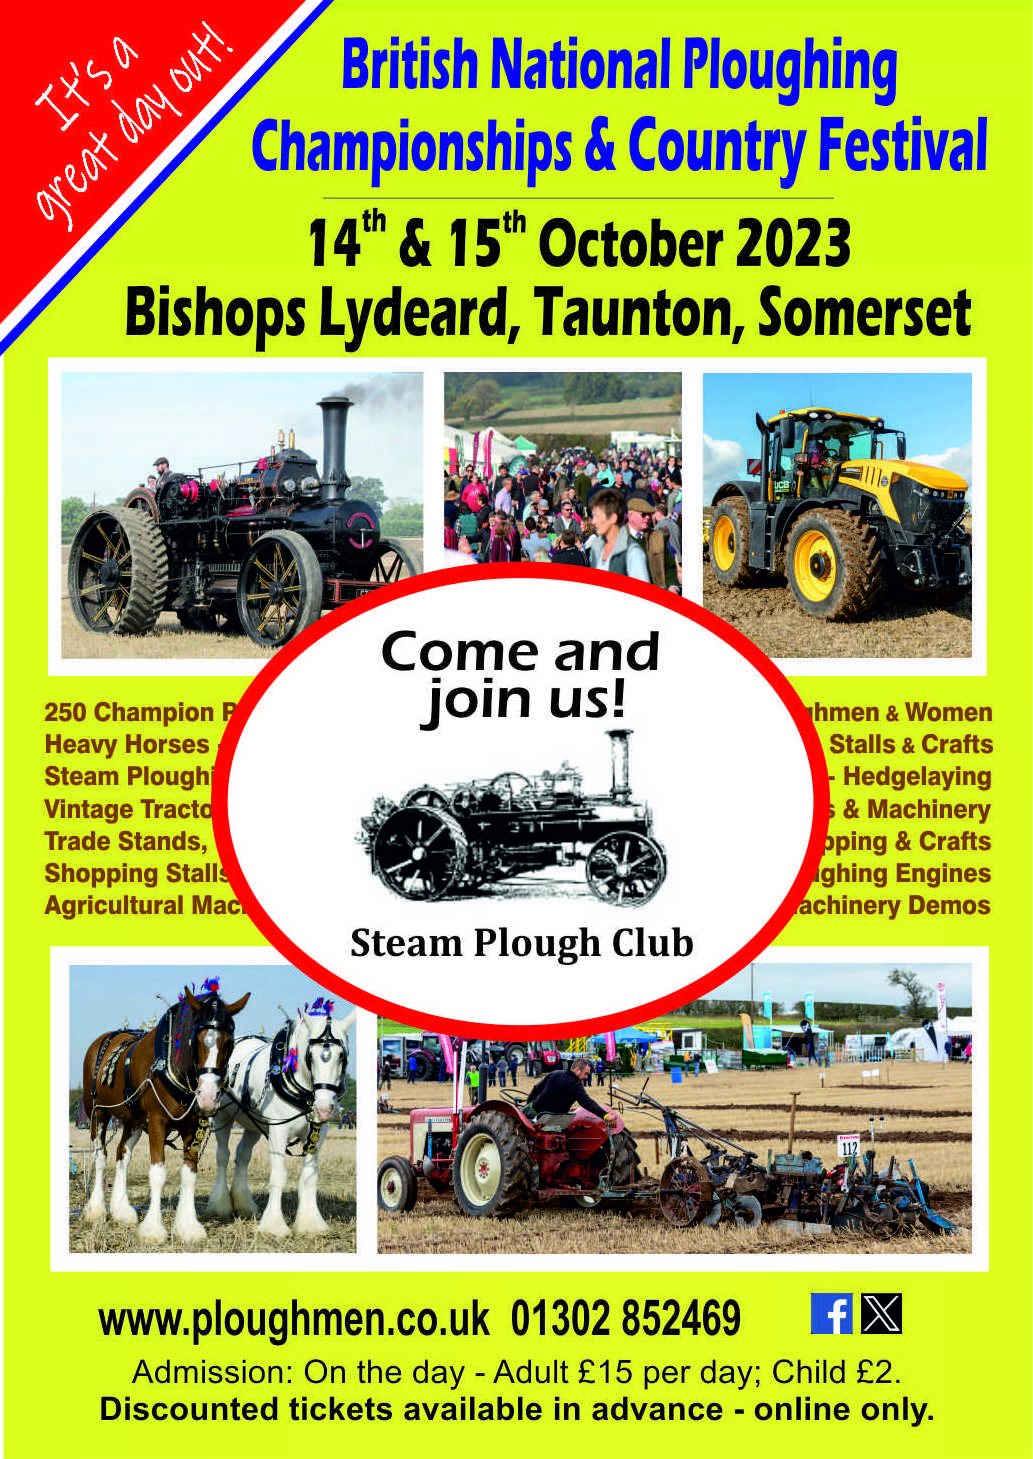 The 72nd British National Ploughing Championships & Country Festival 14th/15th October